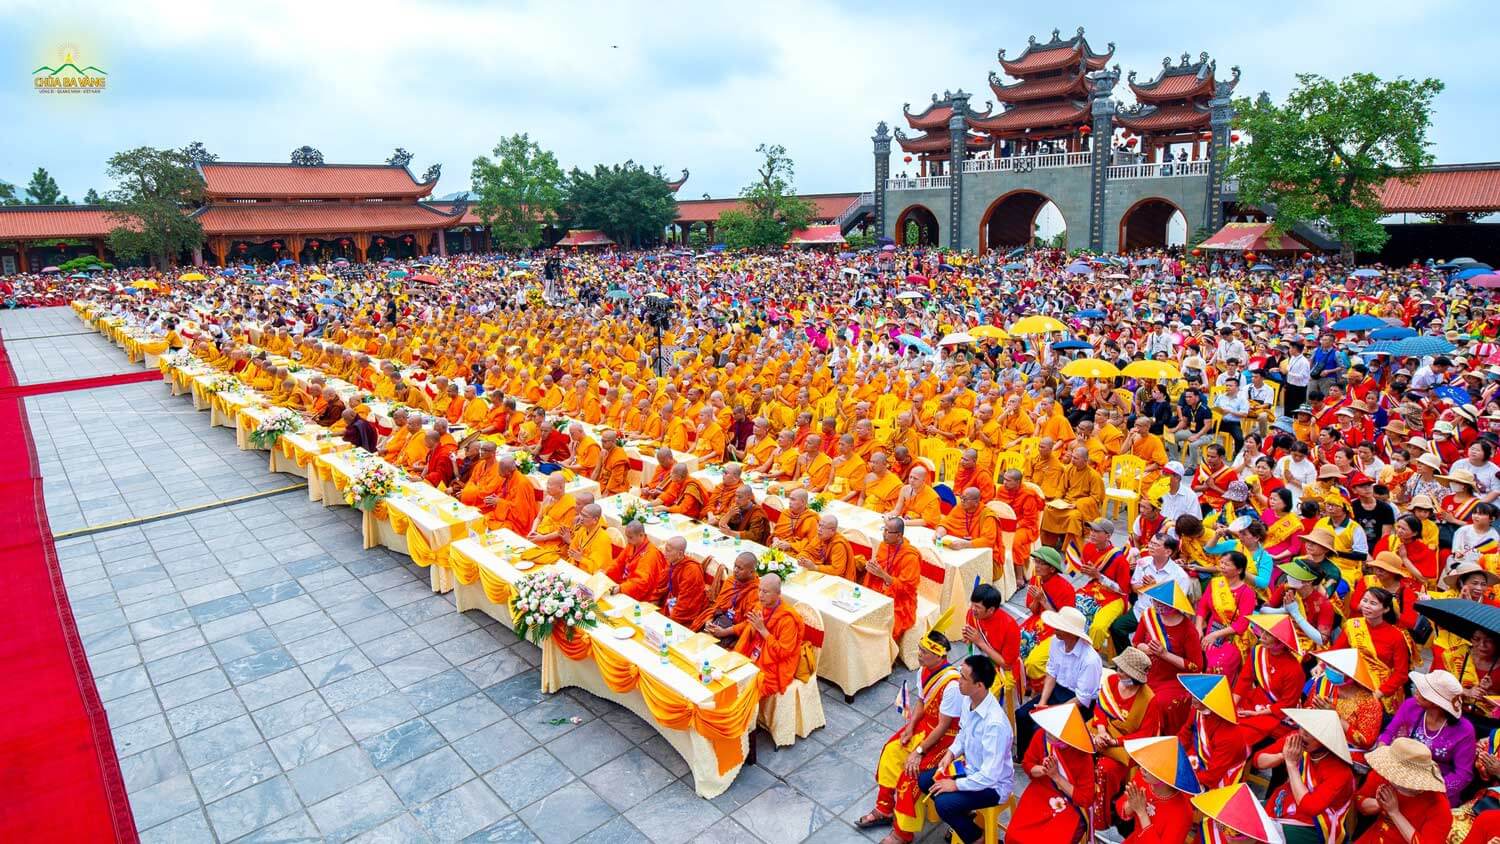 Vesak or the Buddha's birthday, is celebrated in Vietnam from April 8–April 15 on the lunar calendar.